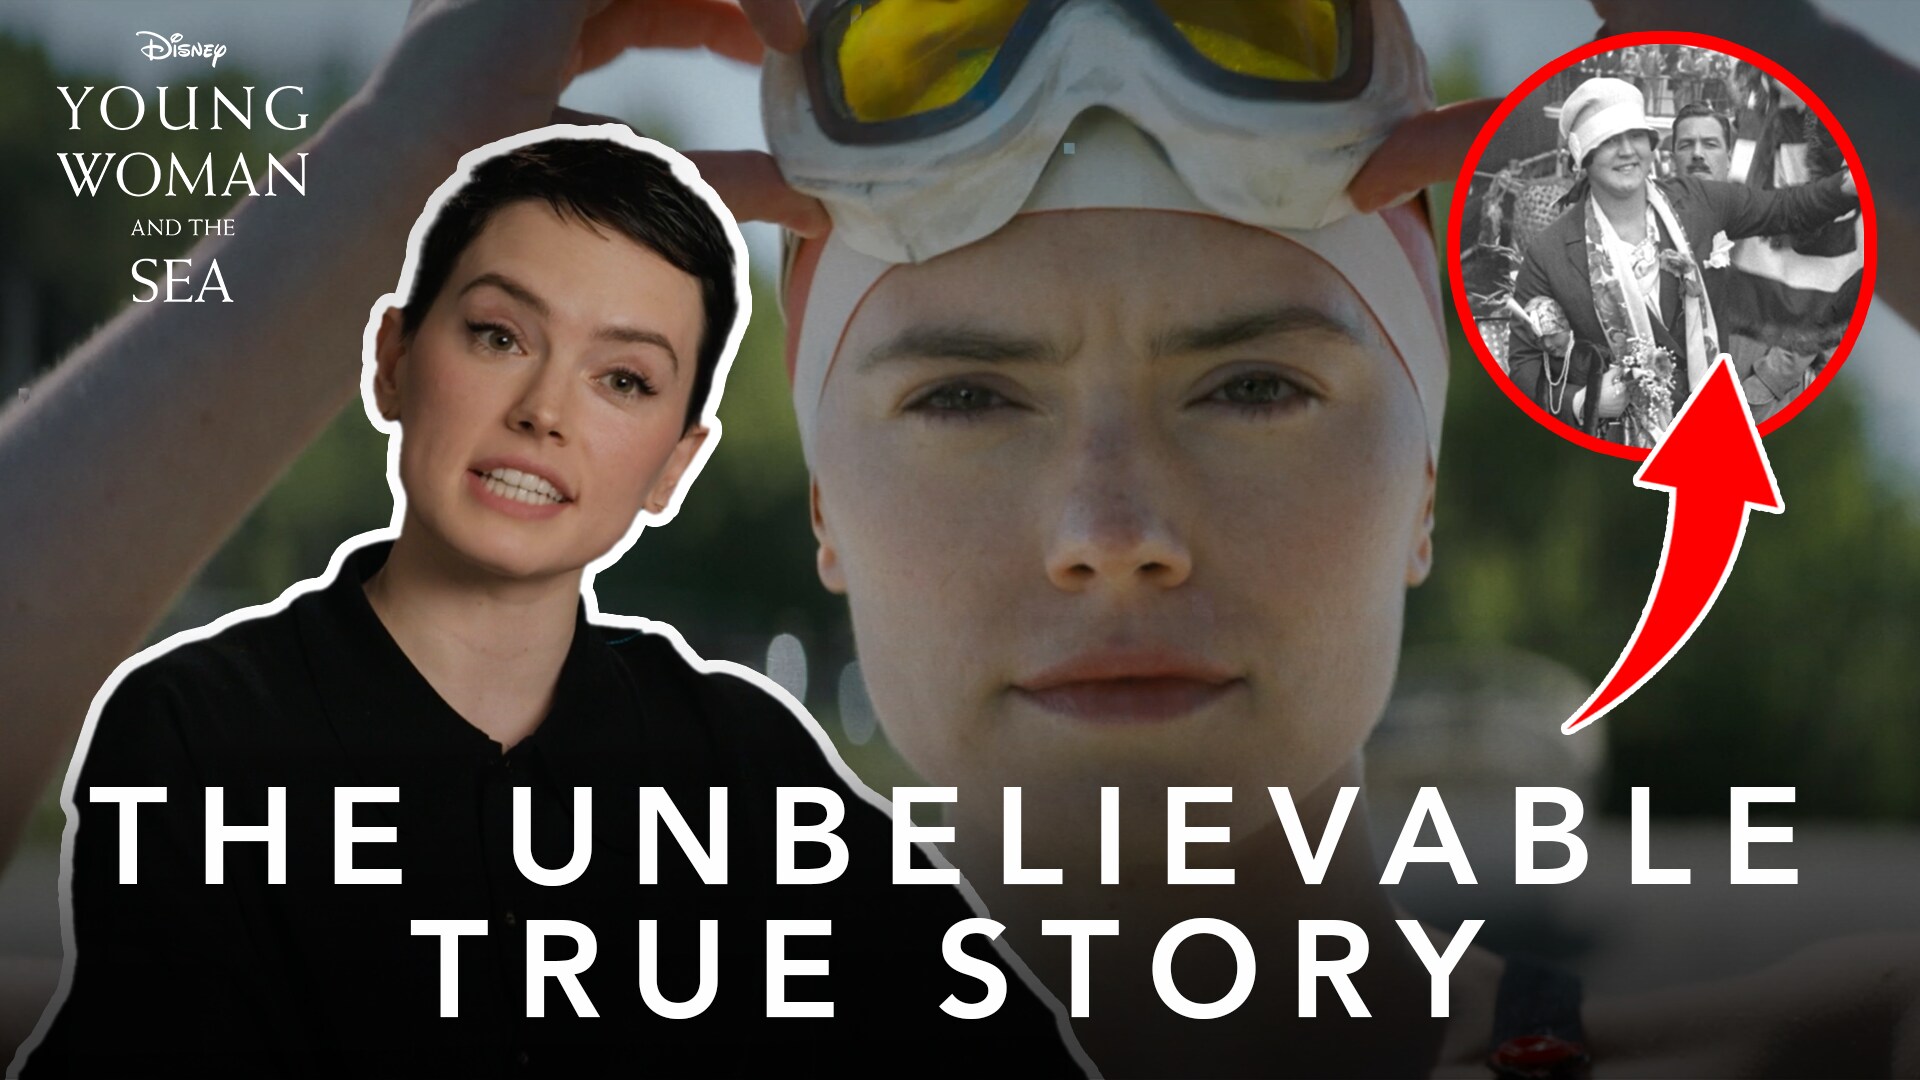 Young Woman and the Sea | The Unbelievable True Story